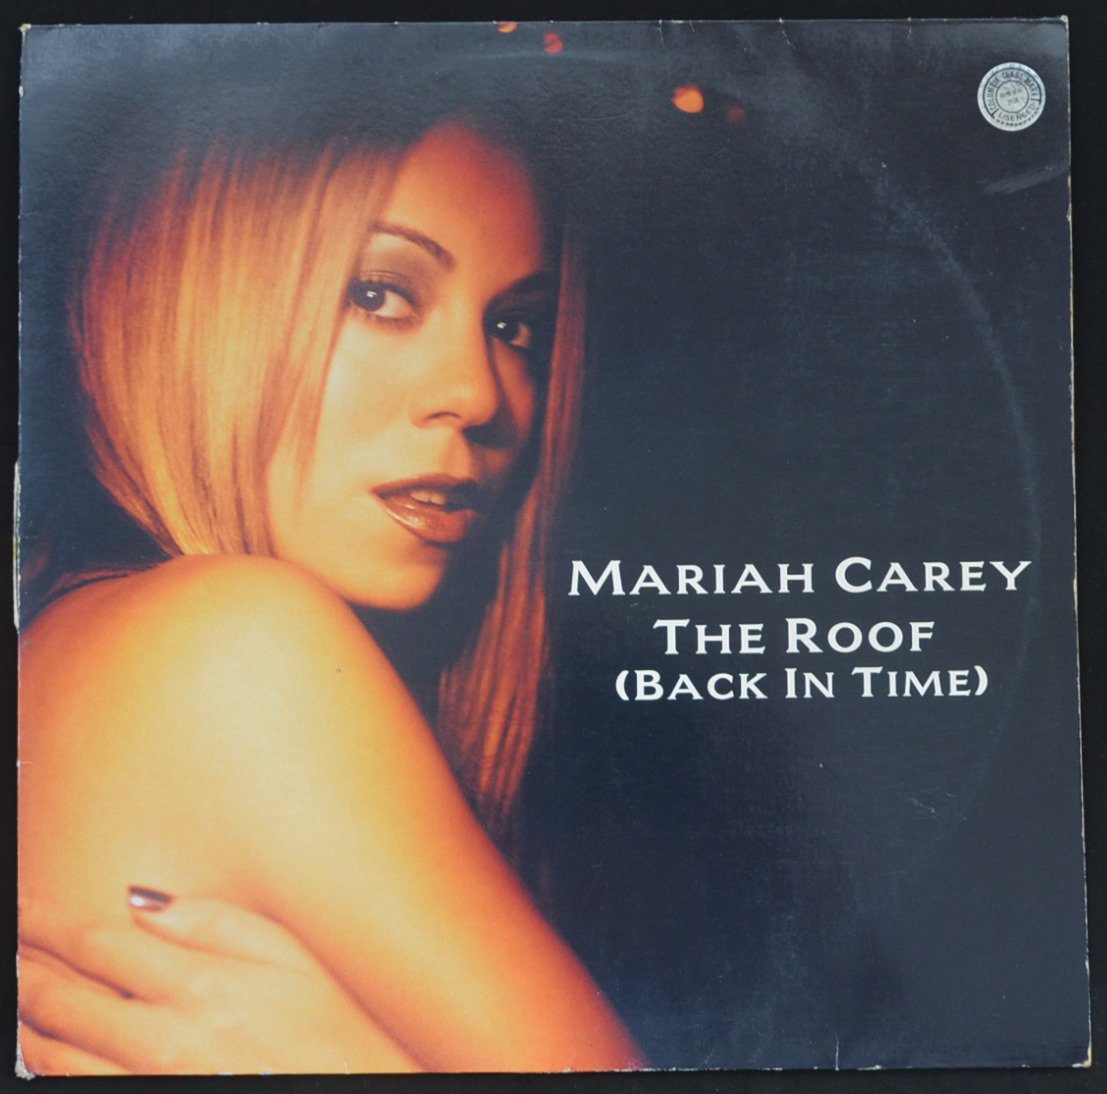 MARIAH CAREY / THE ROOF (BACK IN TIME) / (MOBB DEEP EXTENDED REMIX) (12